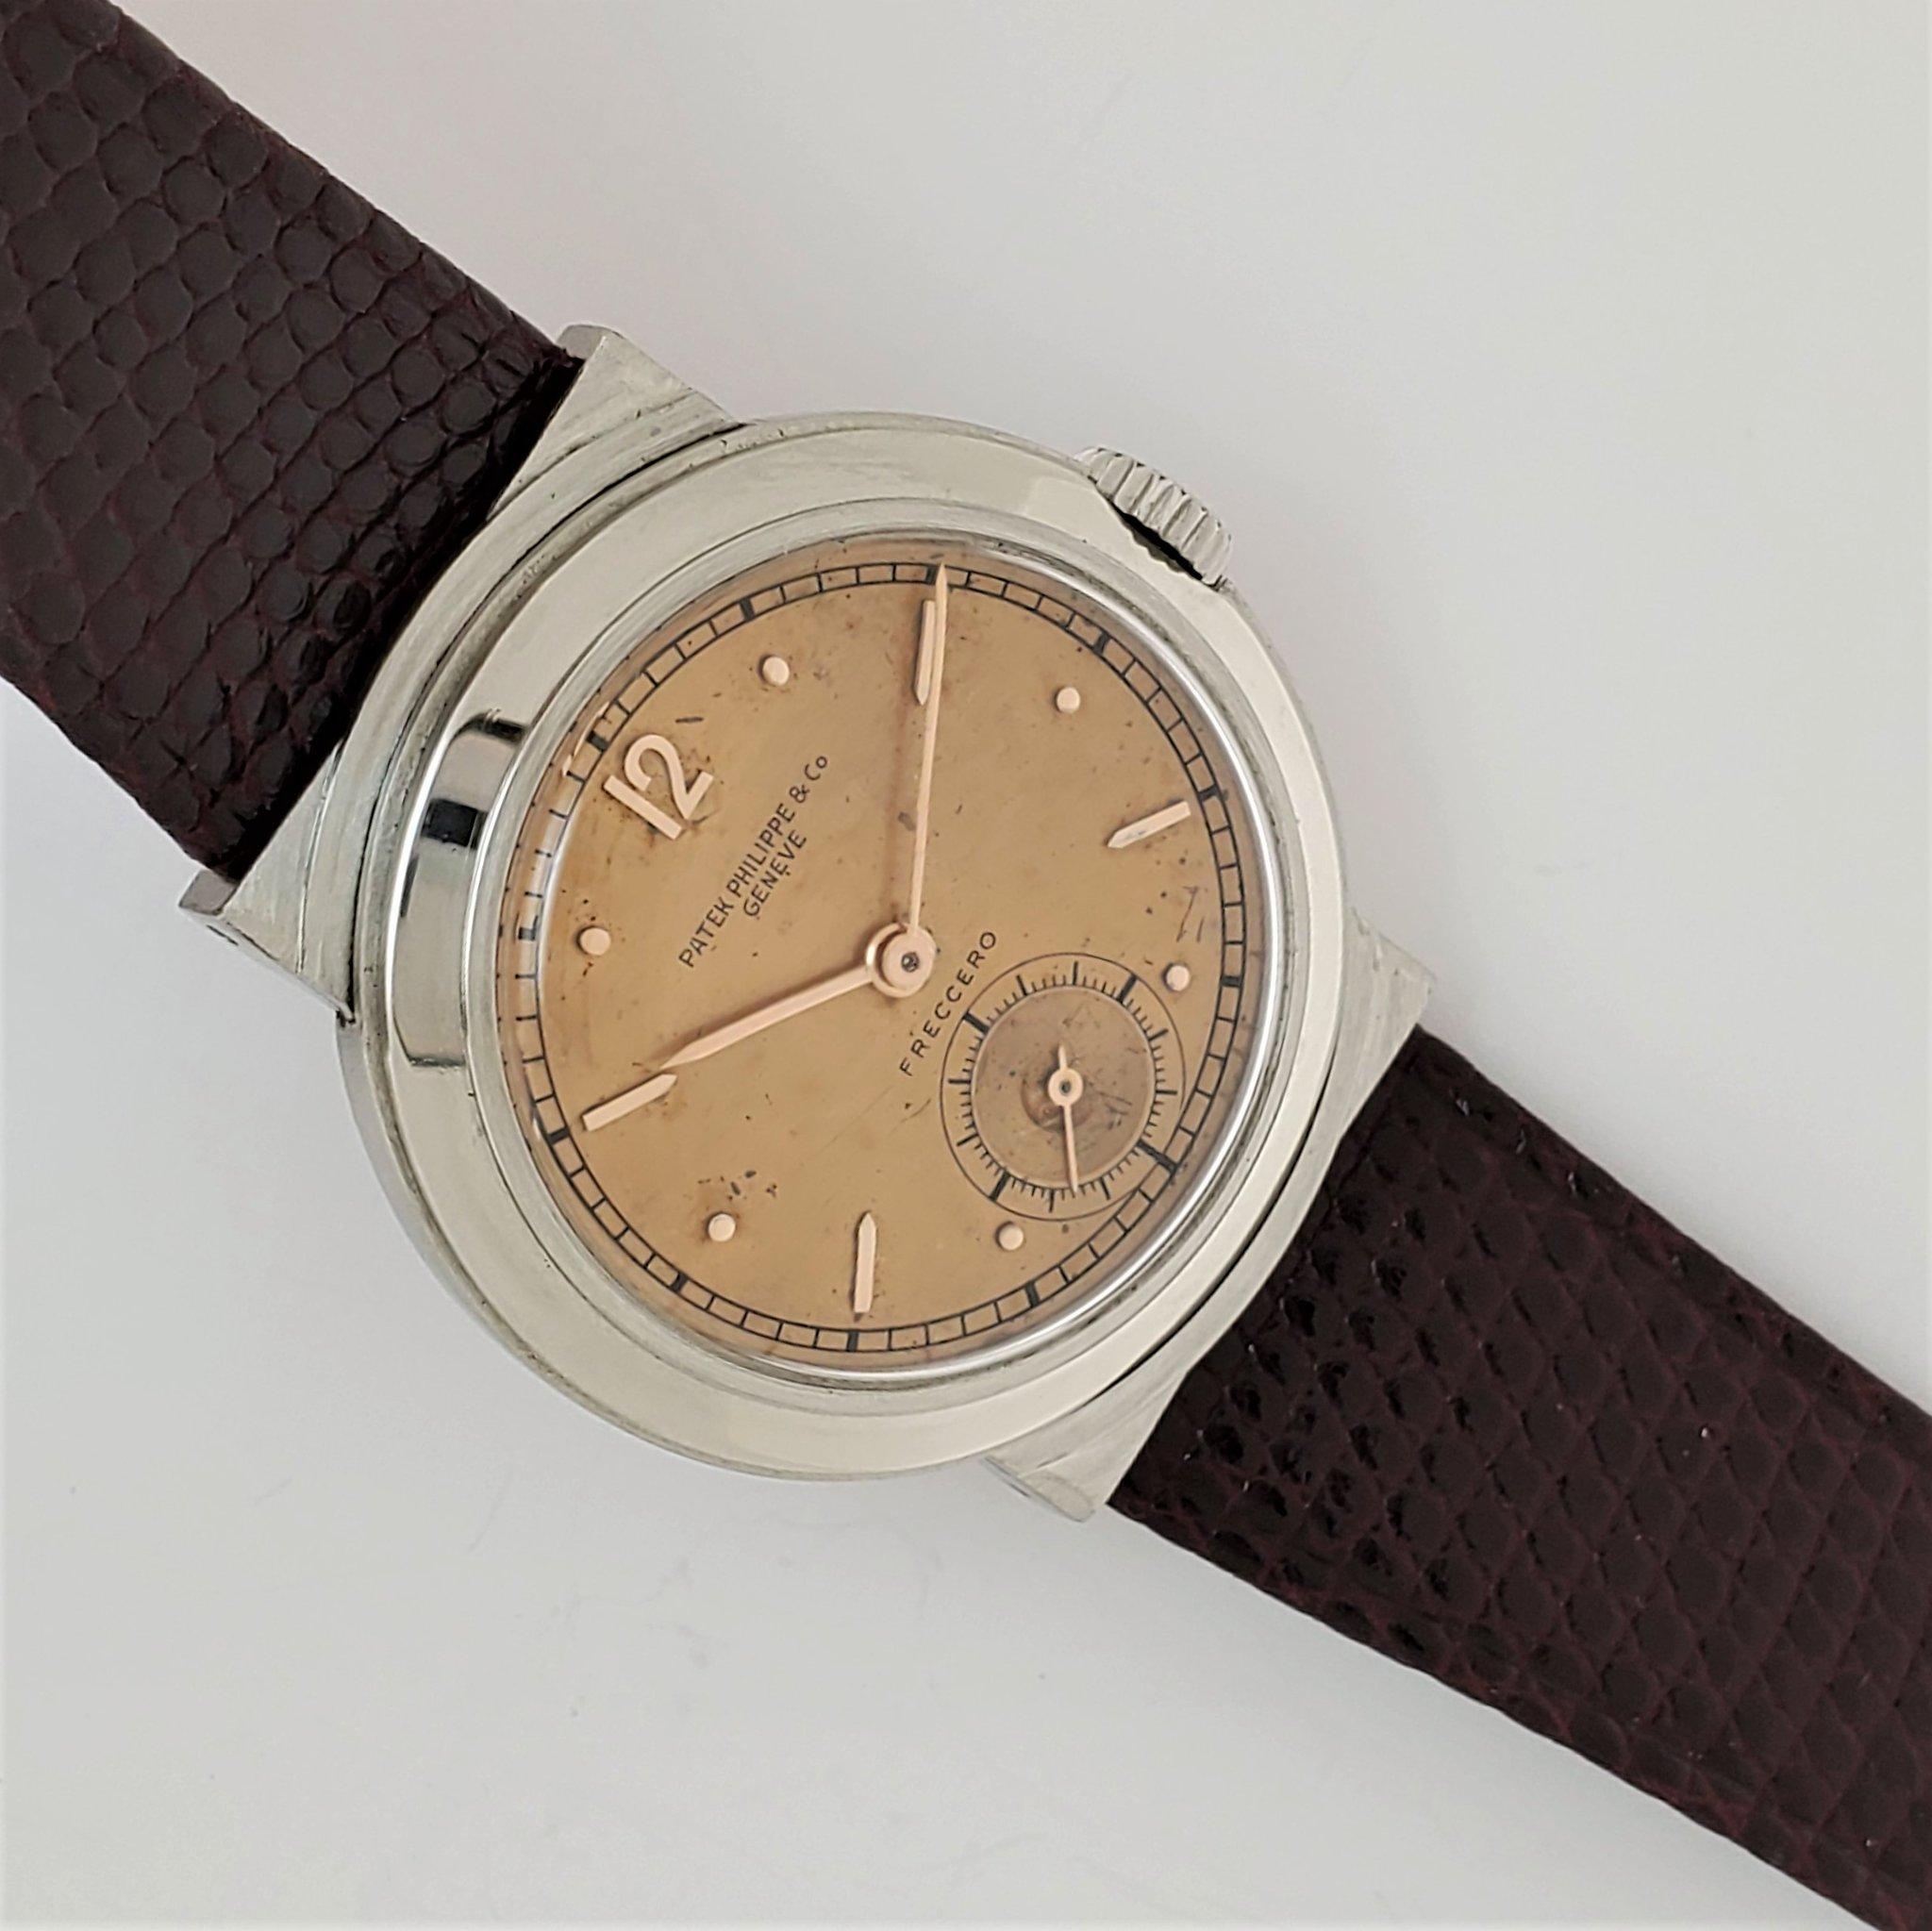 Patek Philippe 544A Stainless Steel Hooded Calatrava Watch In Excellent Condition For Sale In Santa Monica, CA